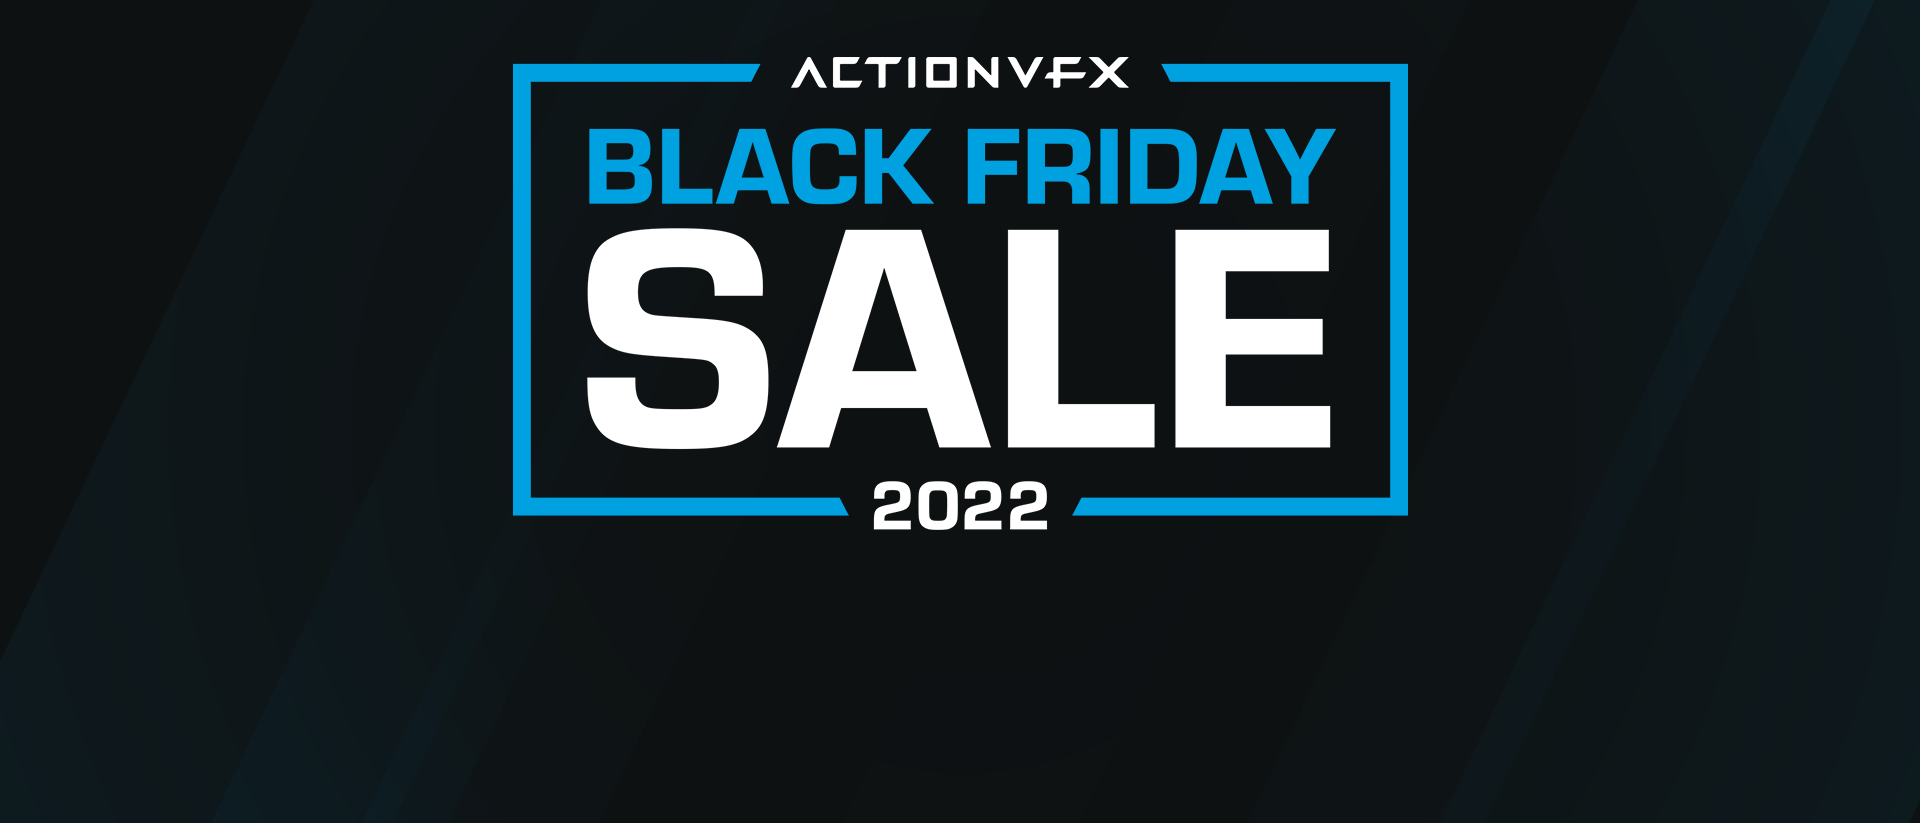 Black Friday 2022 Sale Announcement | 55% Off Sitewide, 2x Elements on New Subscriptions, and More!!